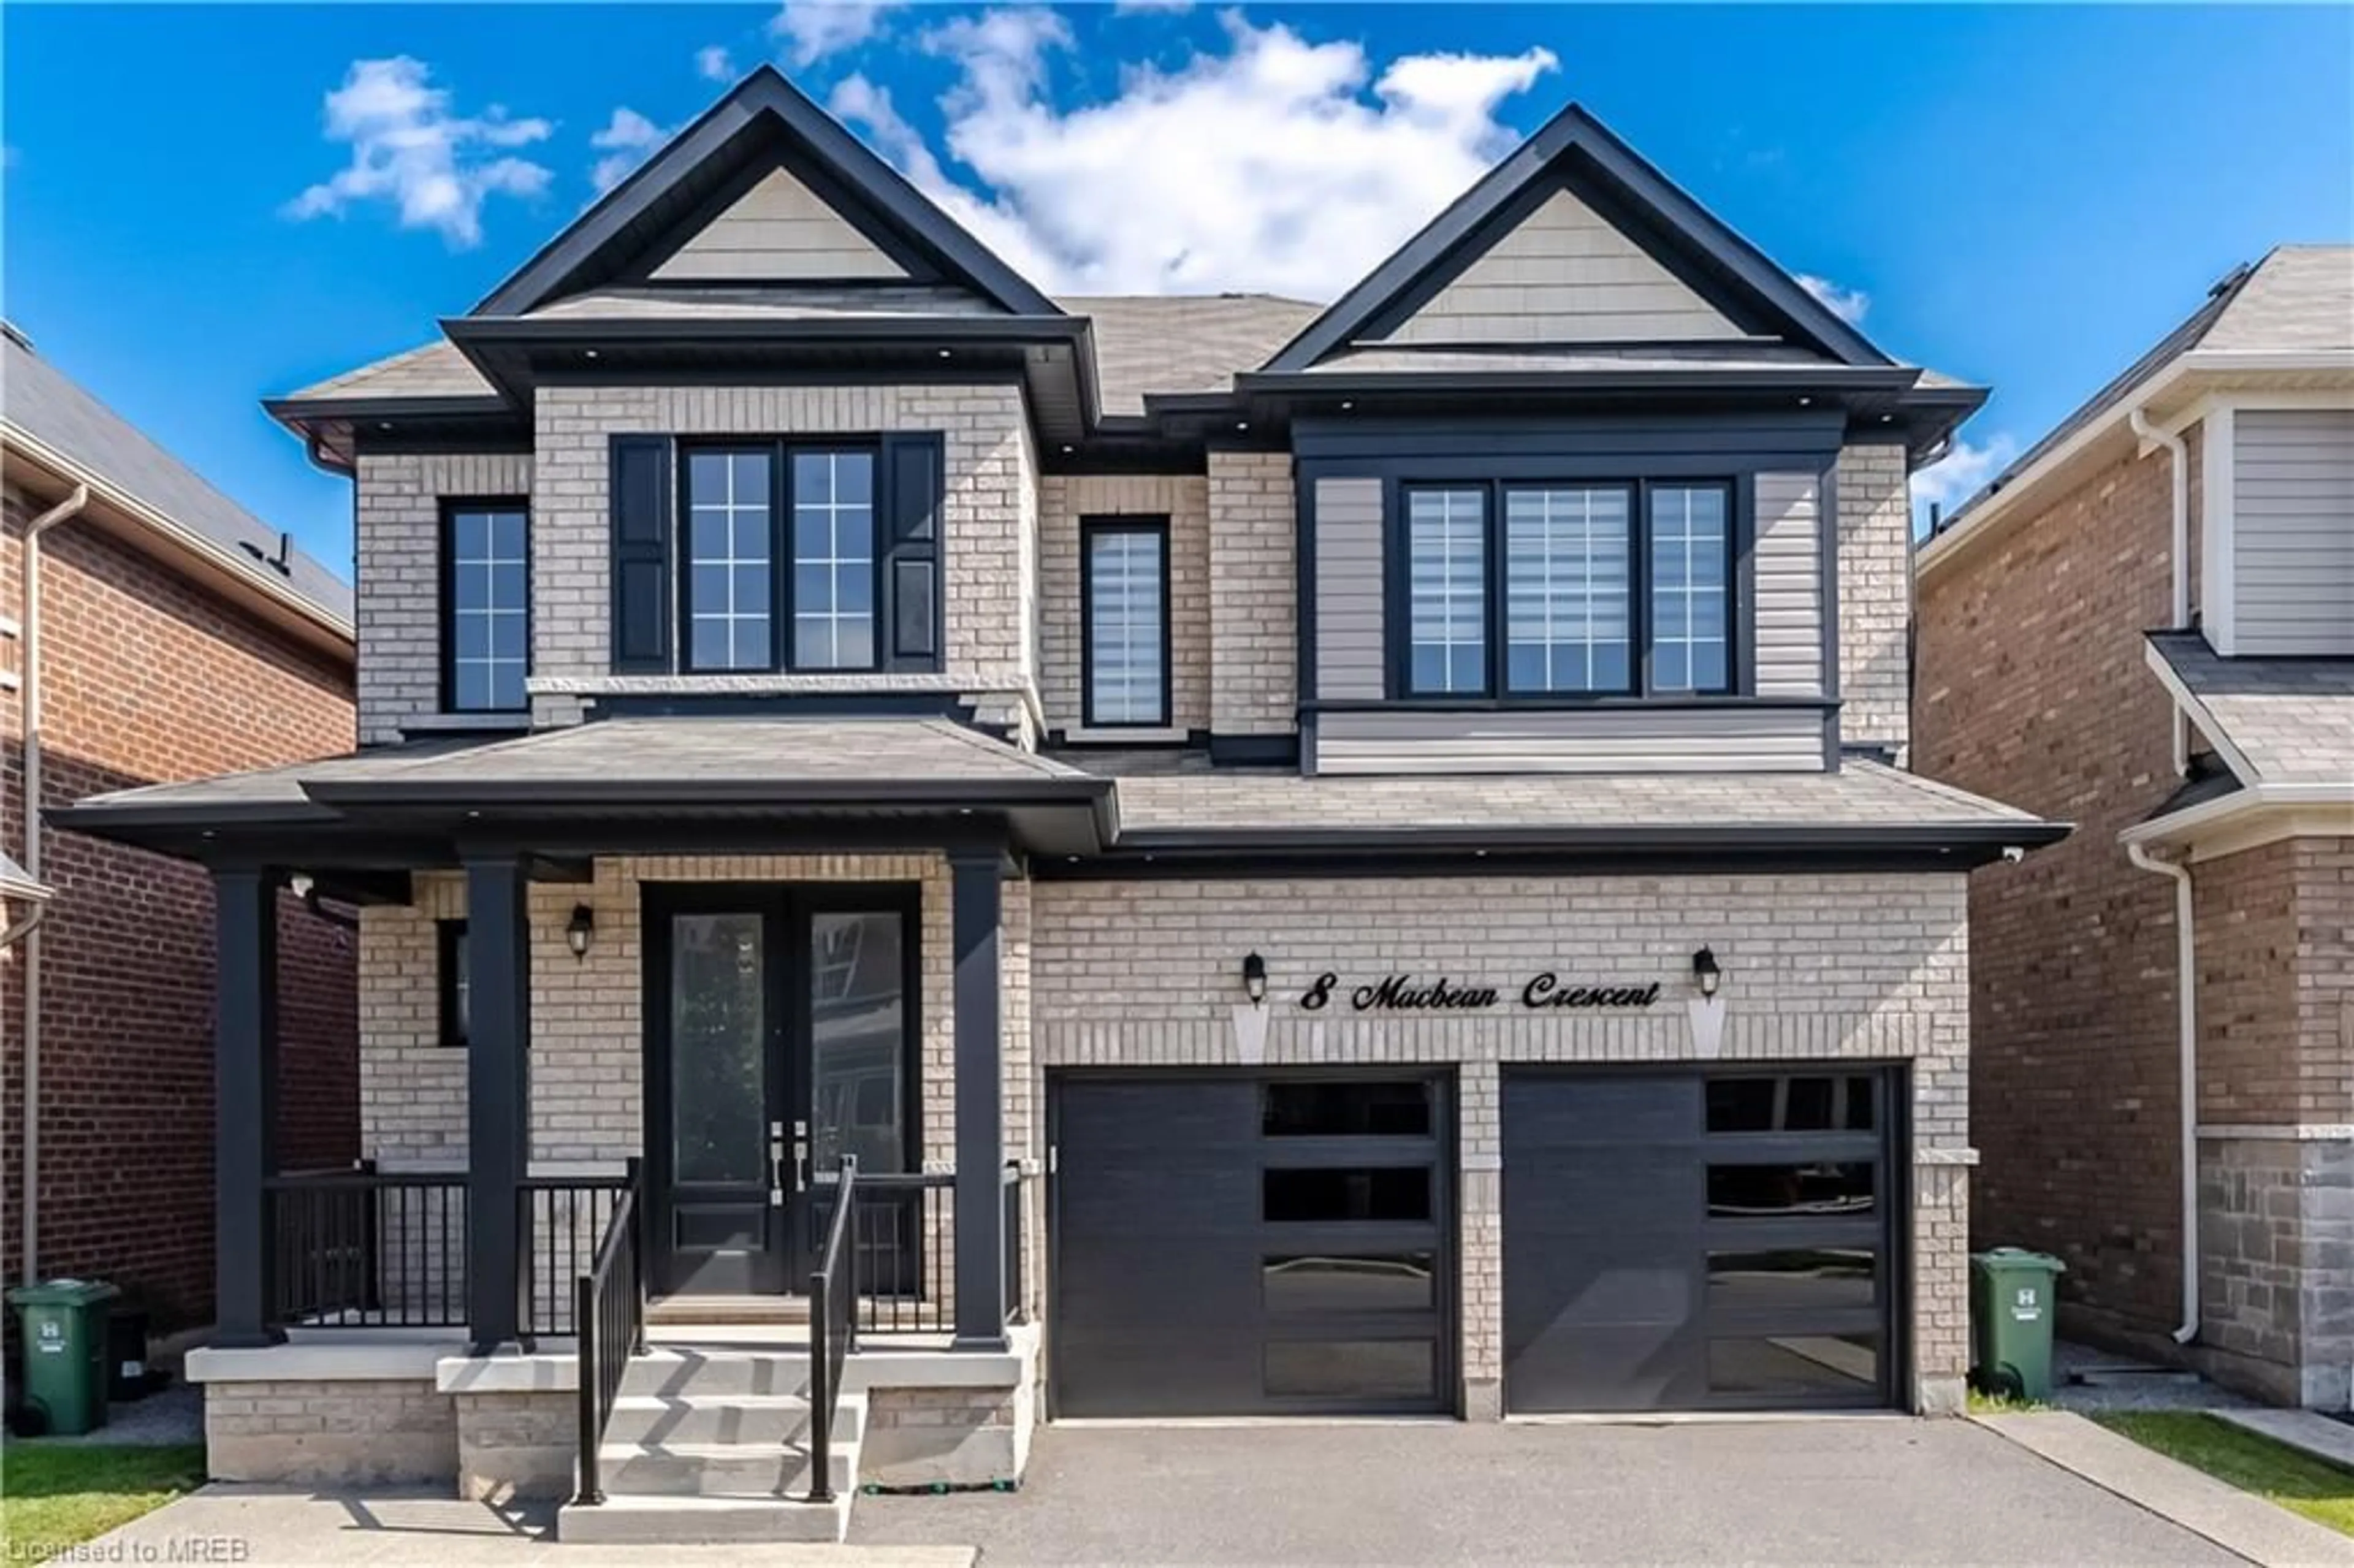 Home with brick exterior material for 8 Macbean Crescent Cres, Waterdown Ontario L0R 2H9